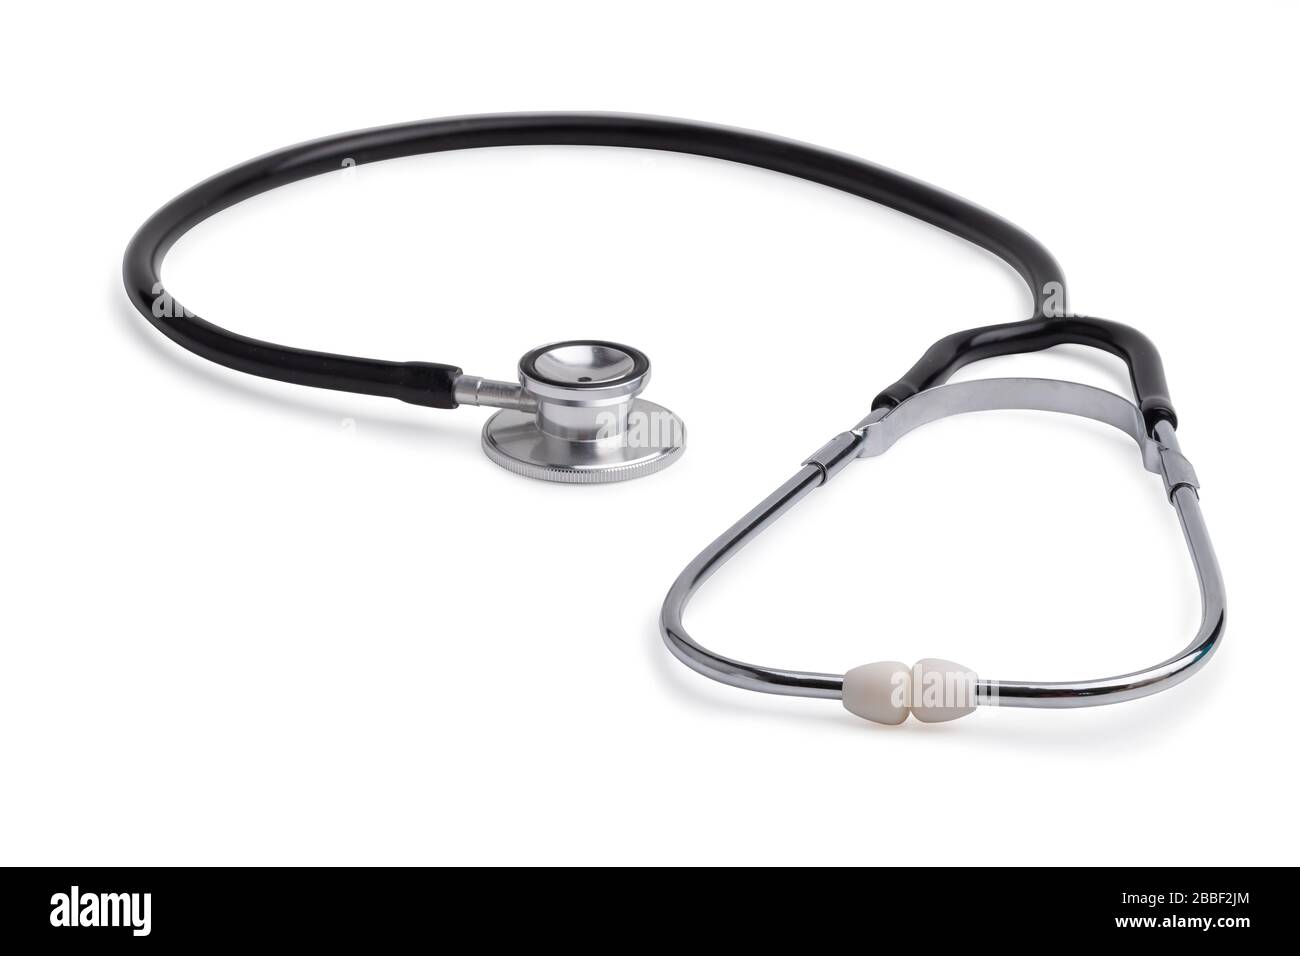 The stethoscope is a device for monitoring heart rhythms. Medical equipment for doctors isolated on a white background with clipping paths. Stock Photo